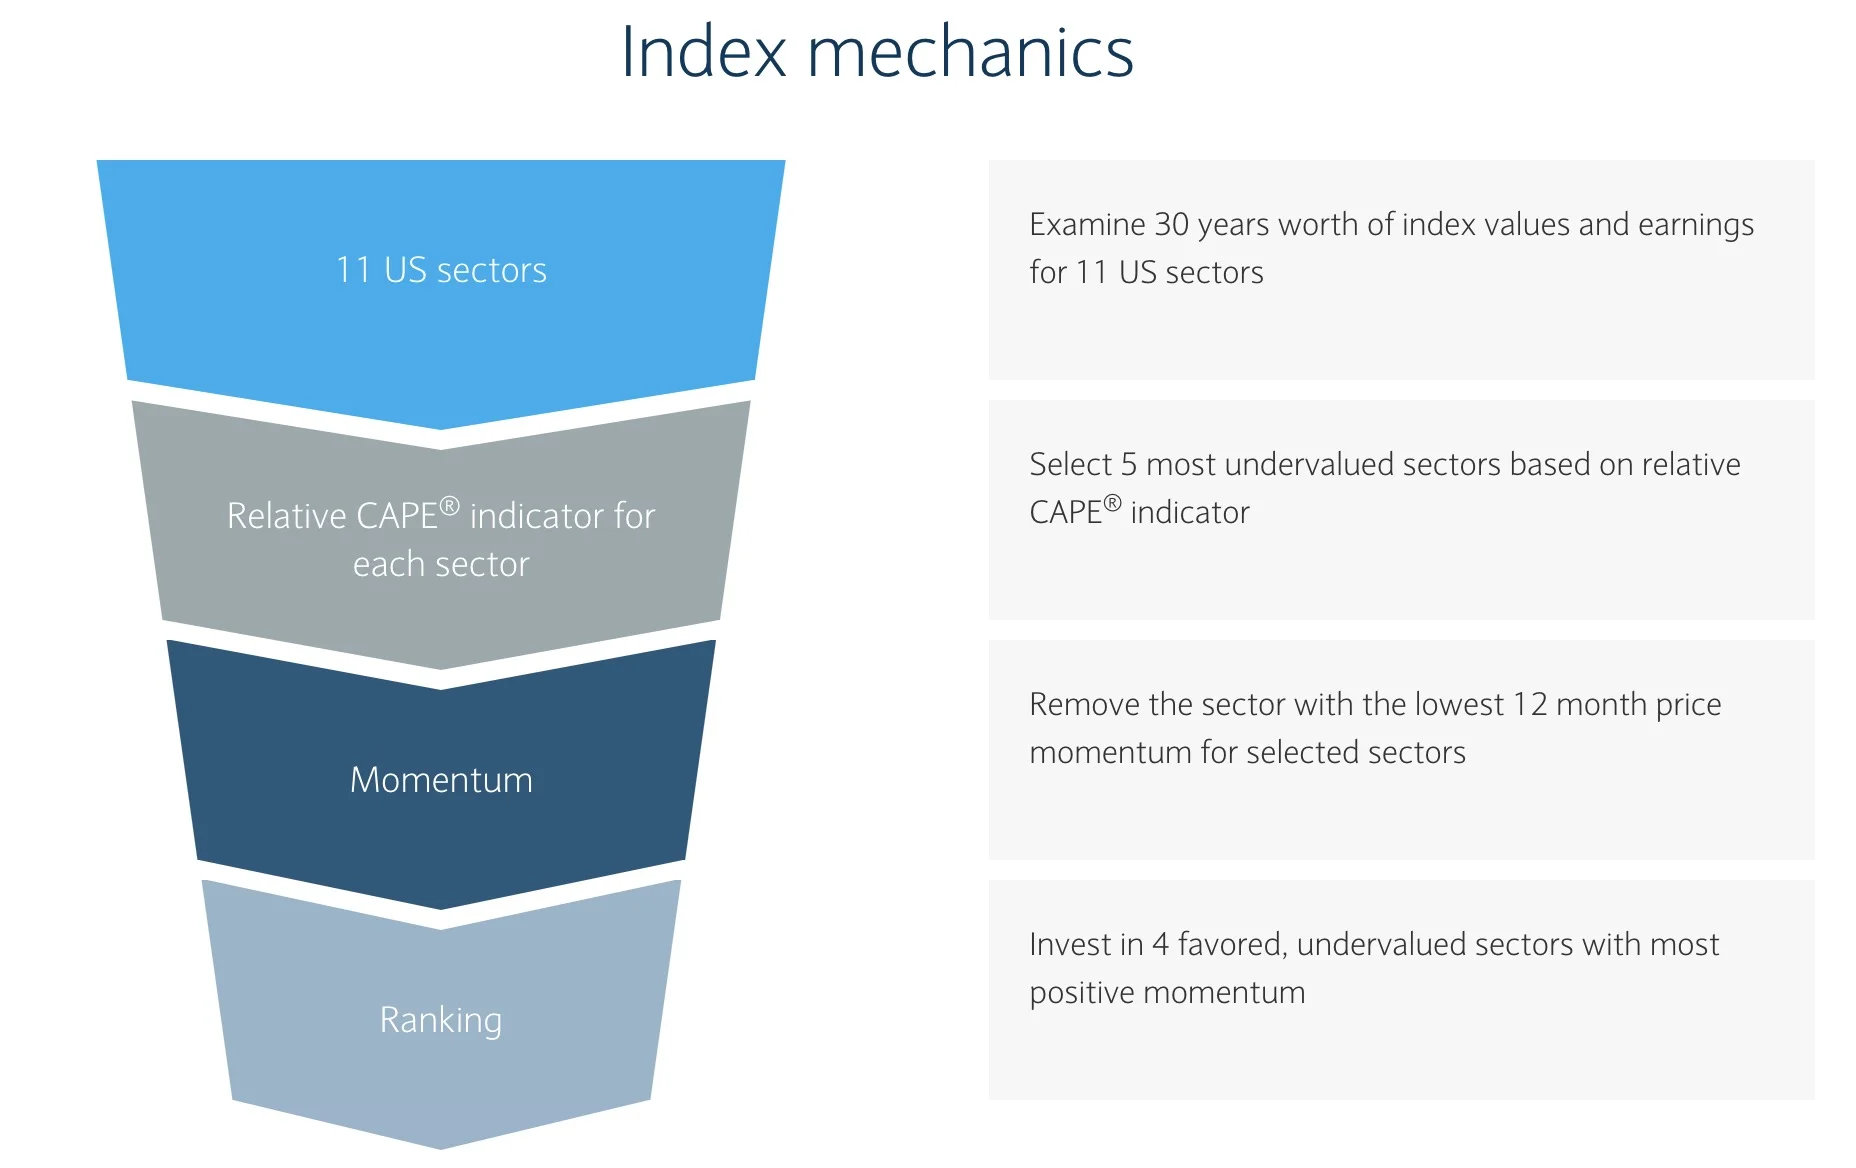 Shiller Enhanced CAPE index mechanics include 11 US Sectors, Relative CAPE indicator for each sector, momentum and ranking 